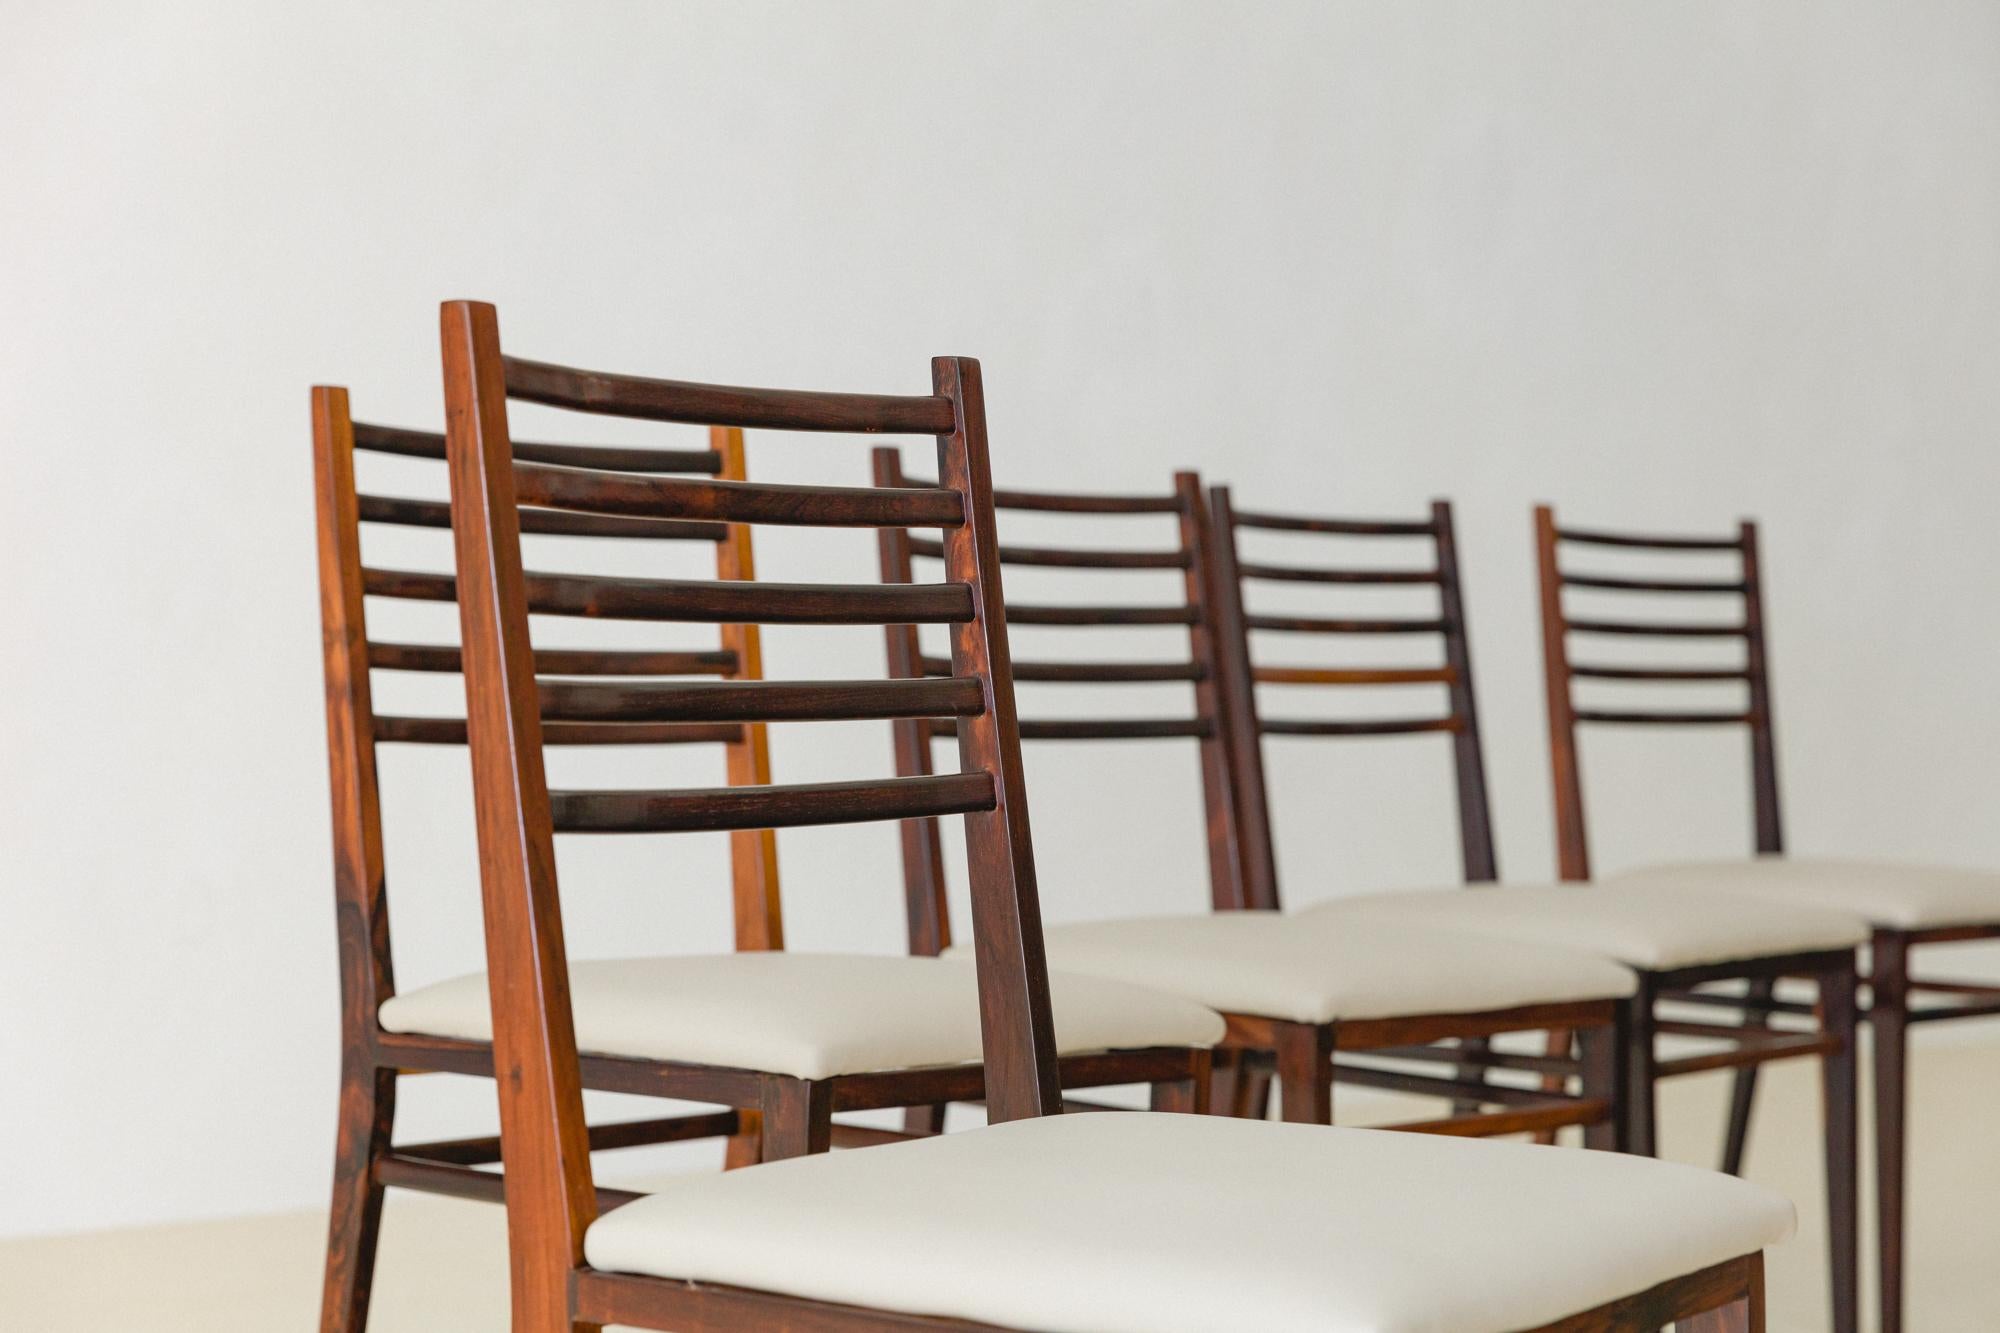 Set of Six Chairs in Rosewood, Model 4015 by Geraldo de Barros, Unilabor, 1950s For Sale 2